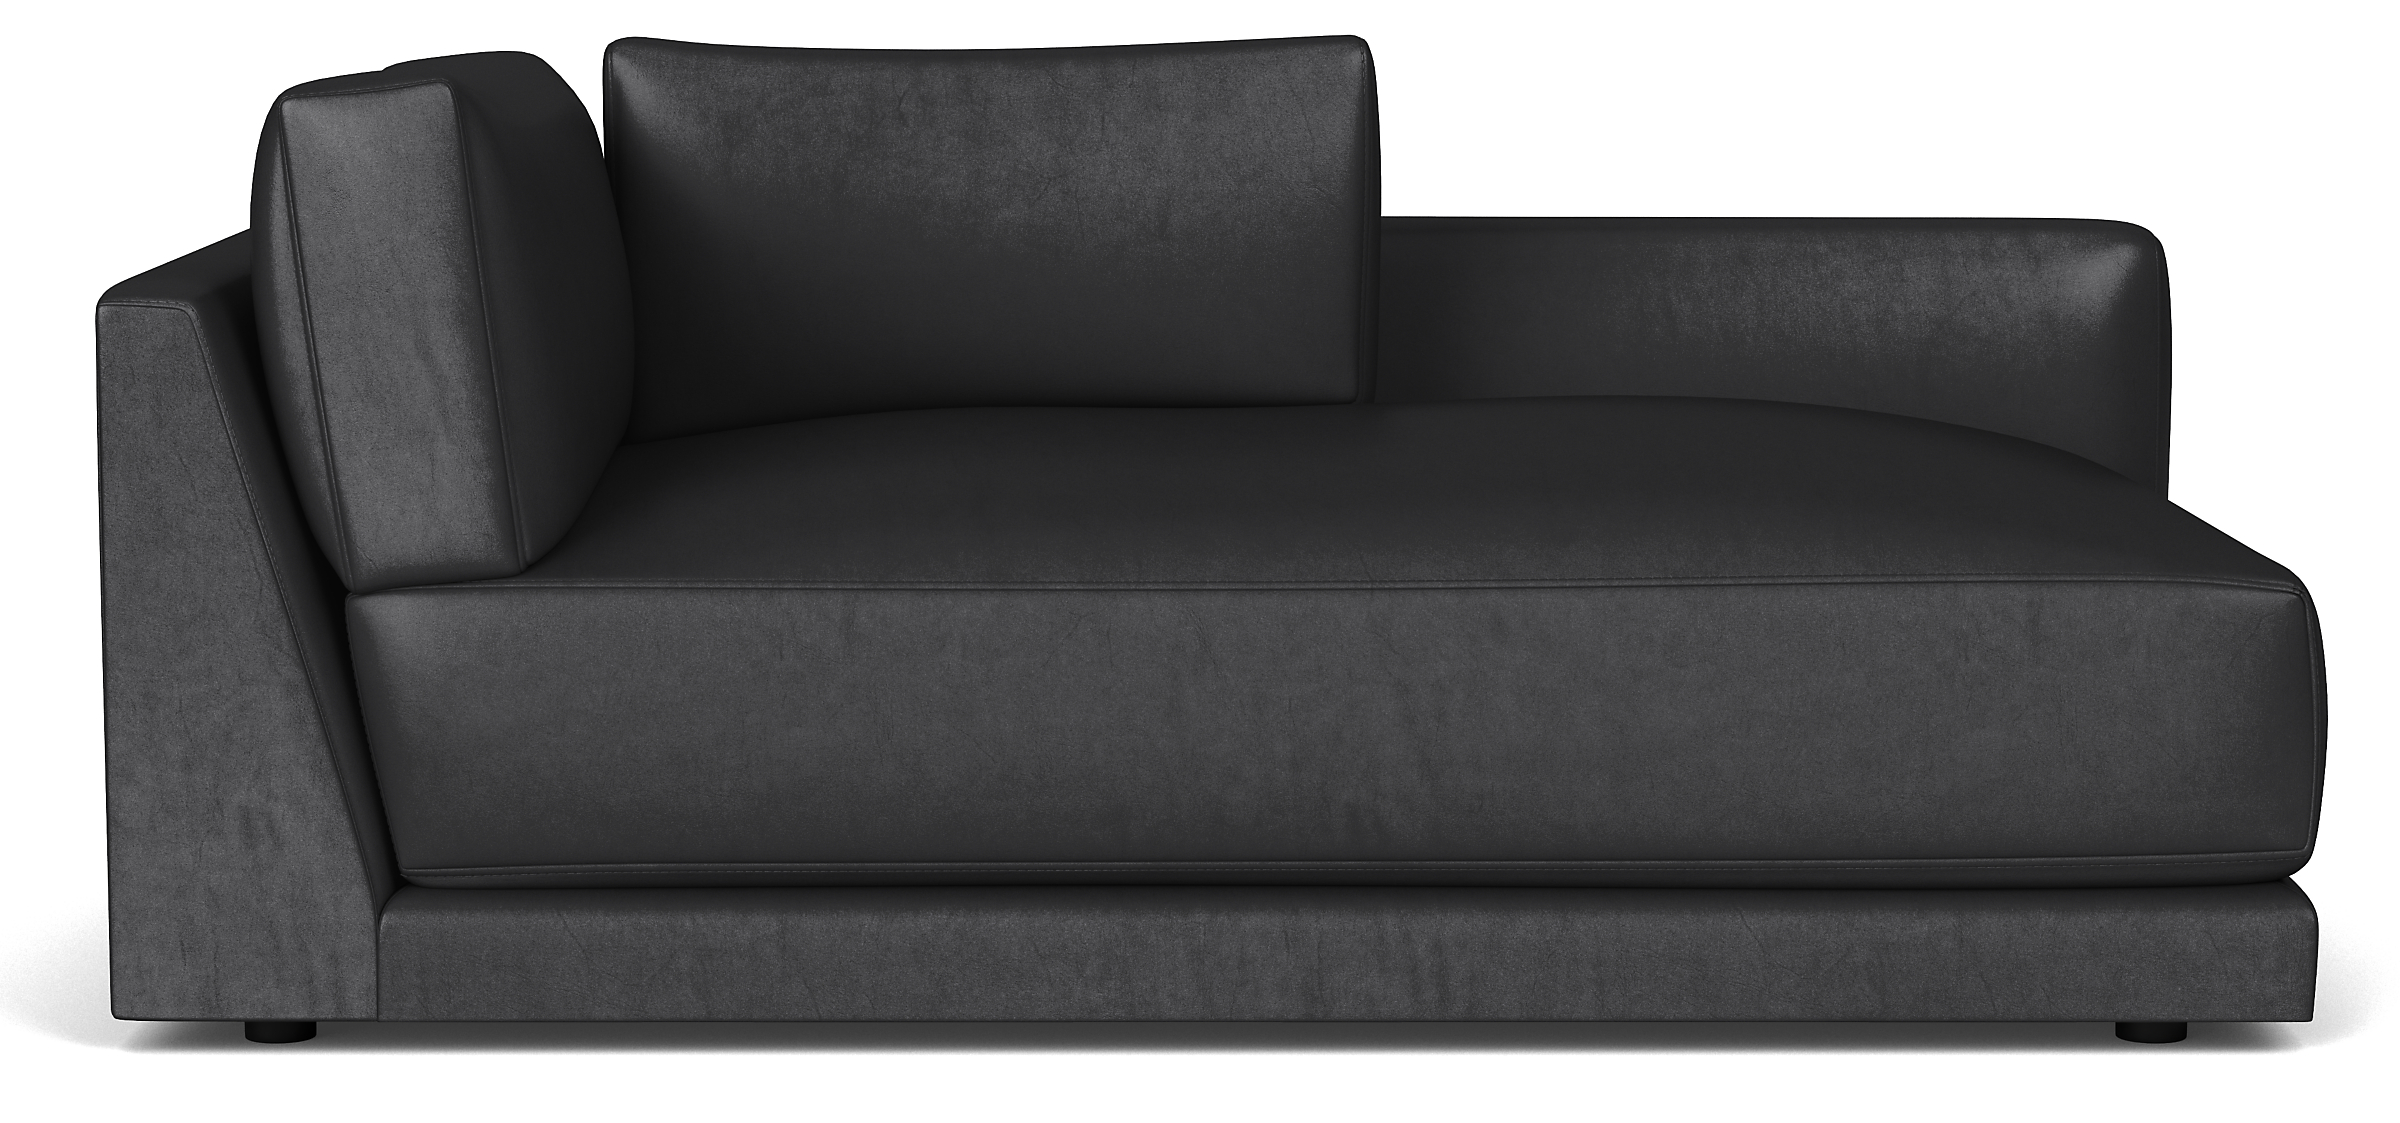 Clemens Leather Chaise